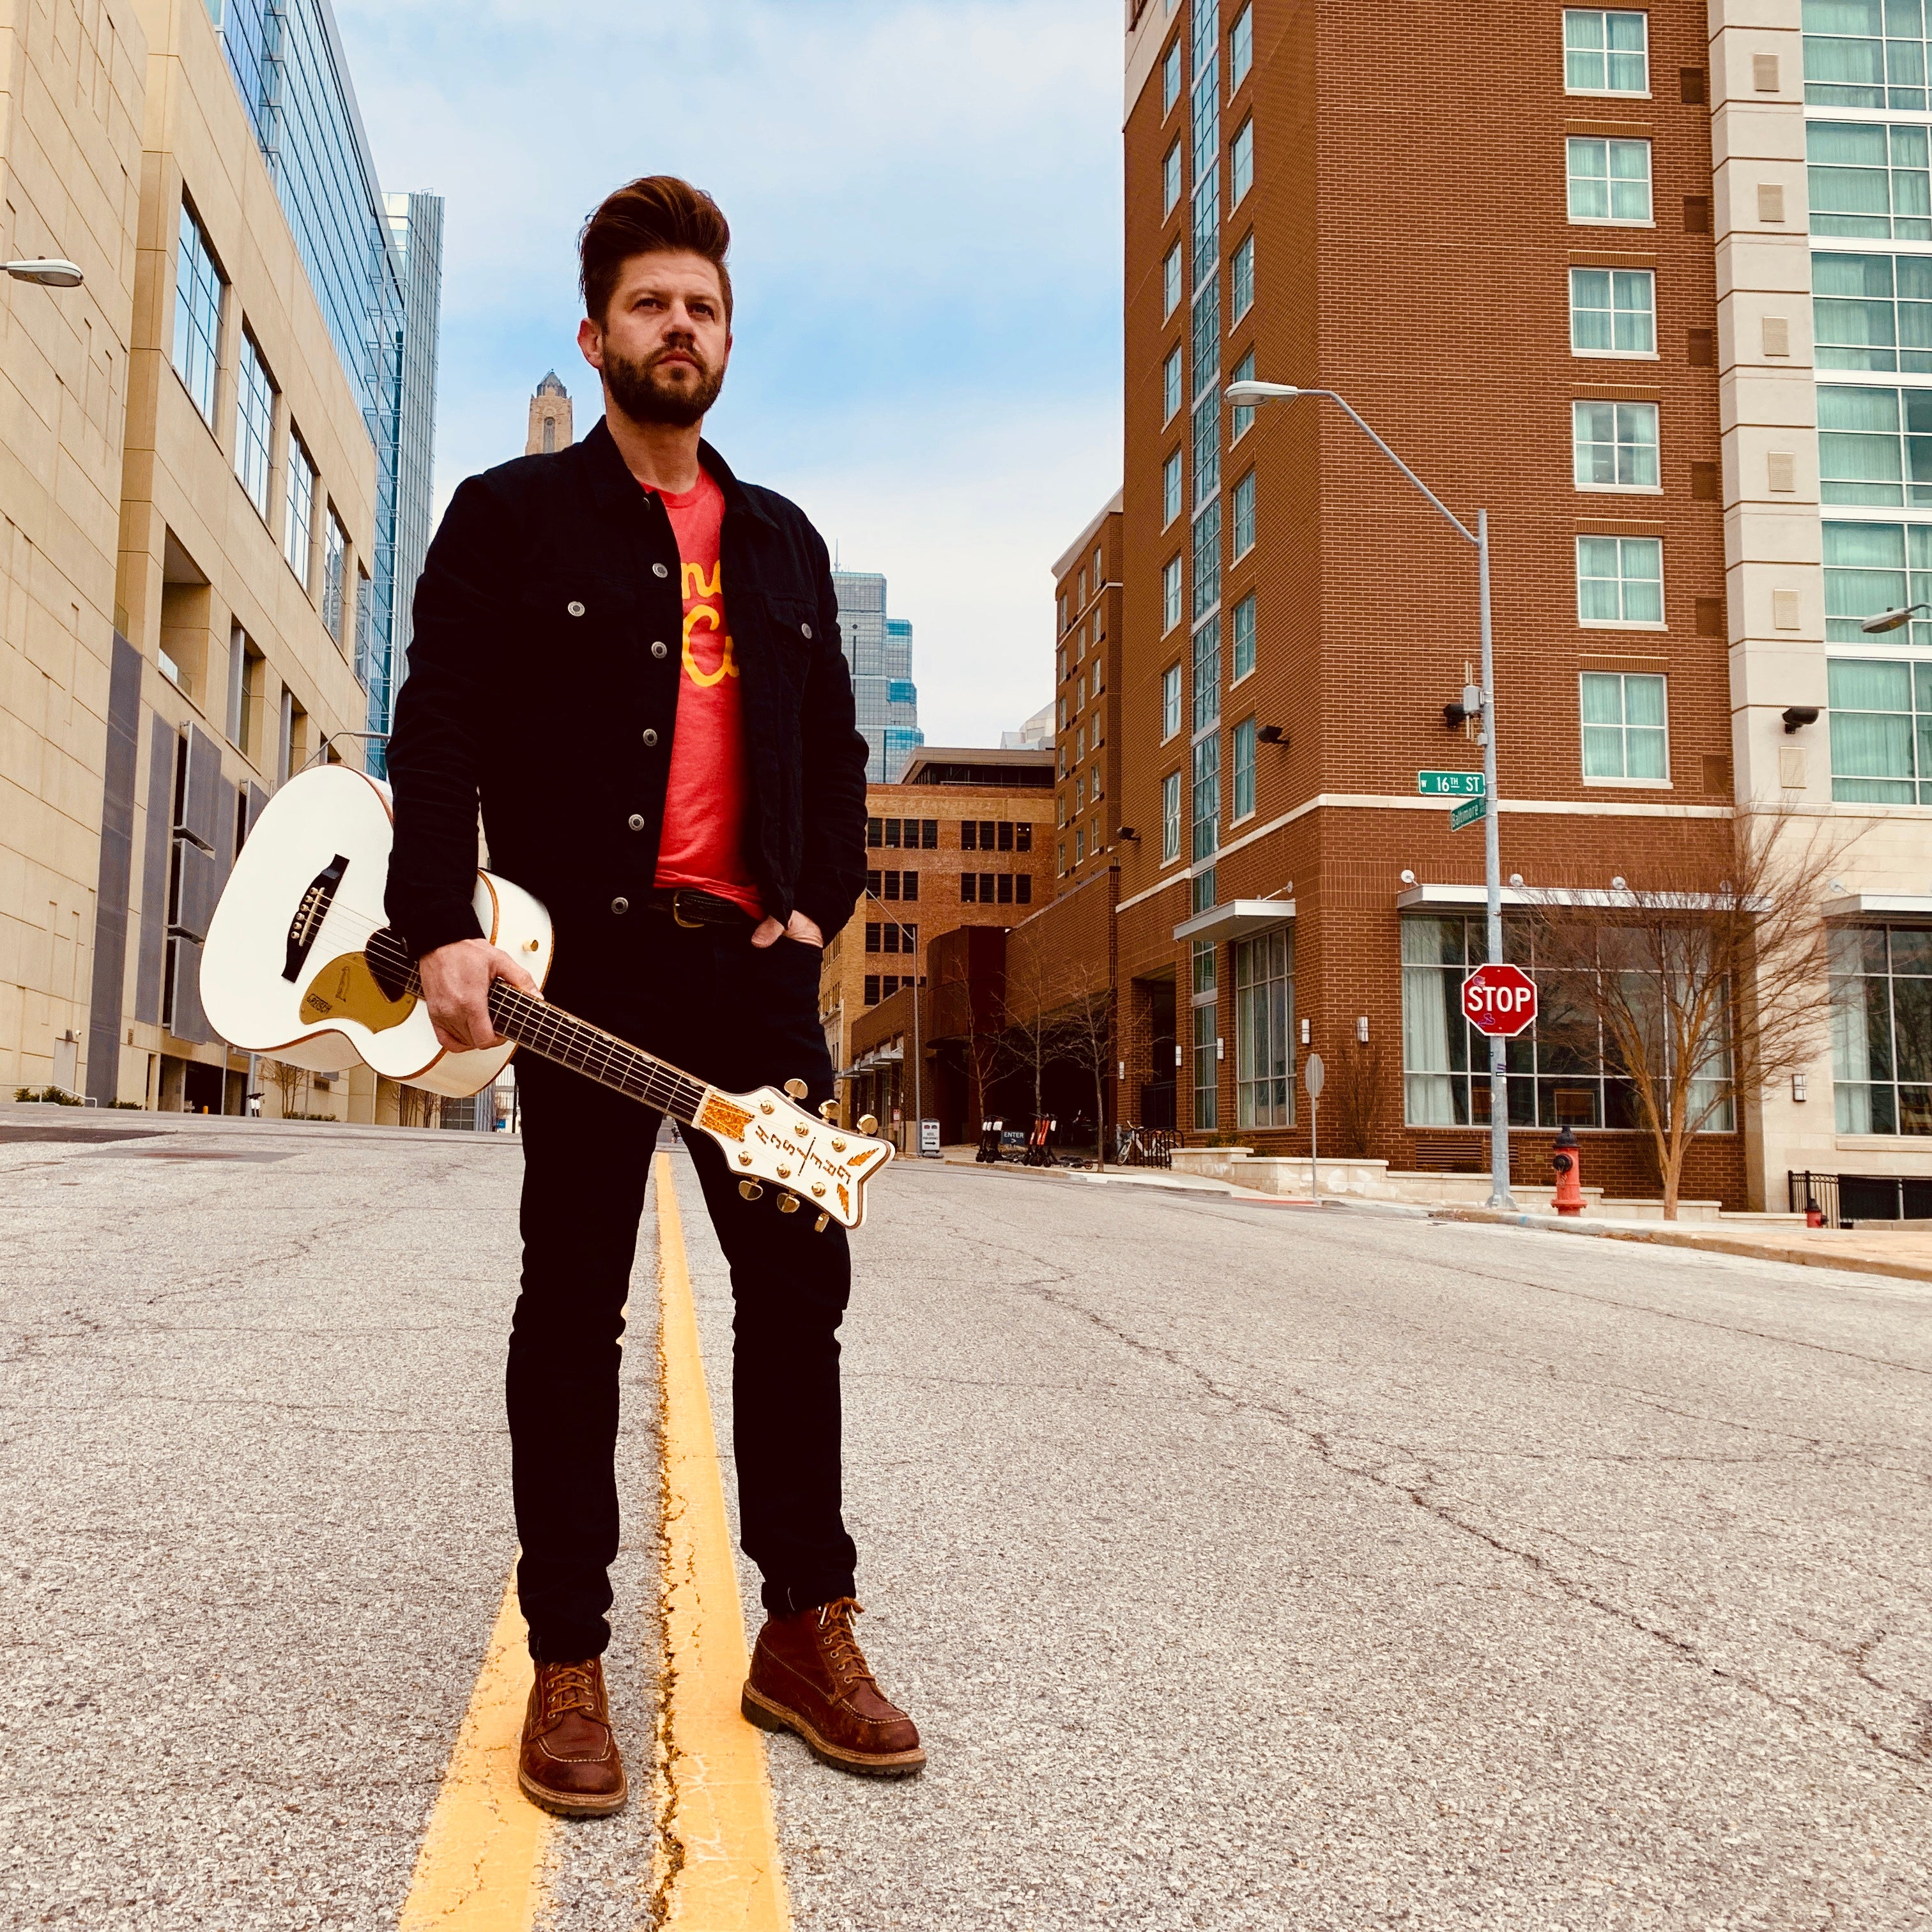 ULAH Talks with David Luther About New Song - "Home To Kansas City"